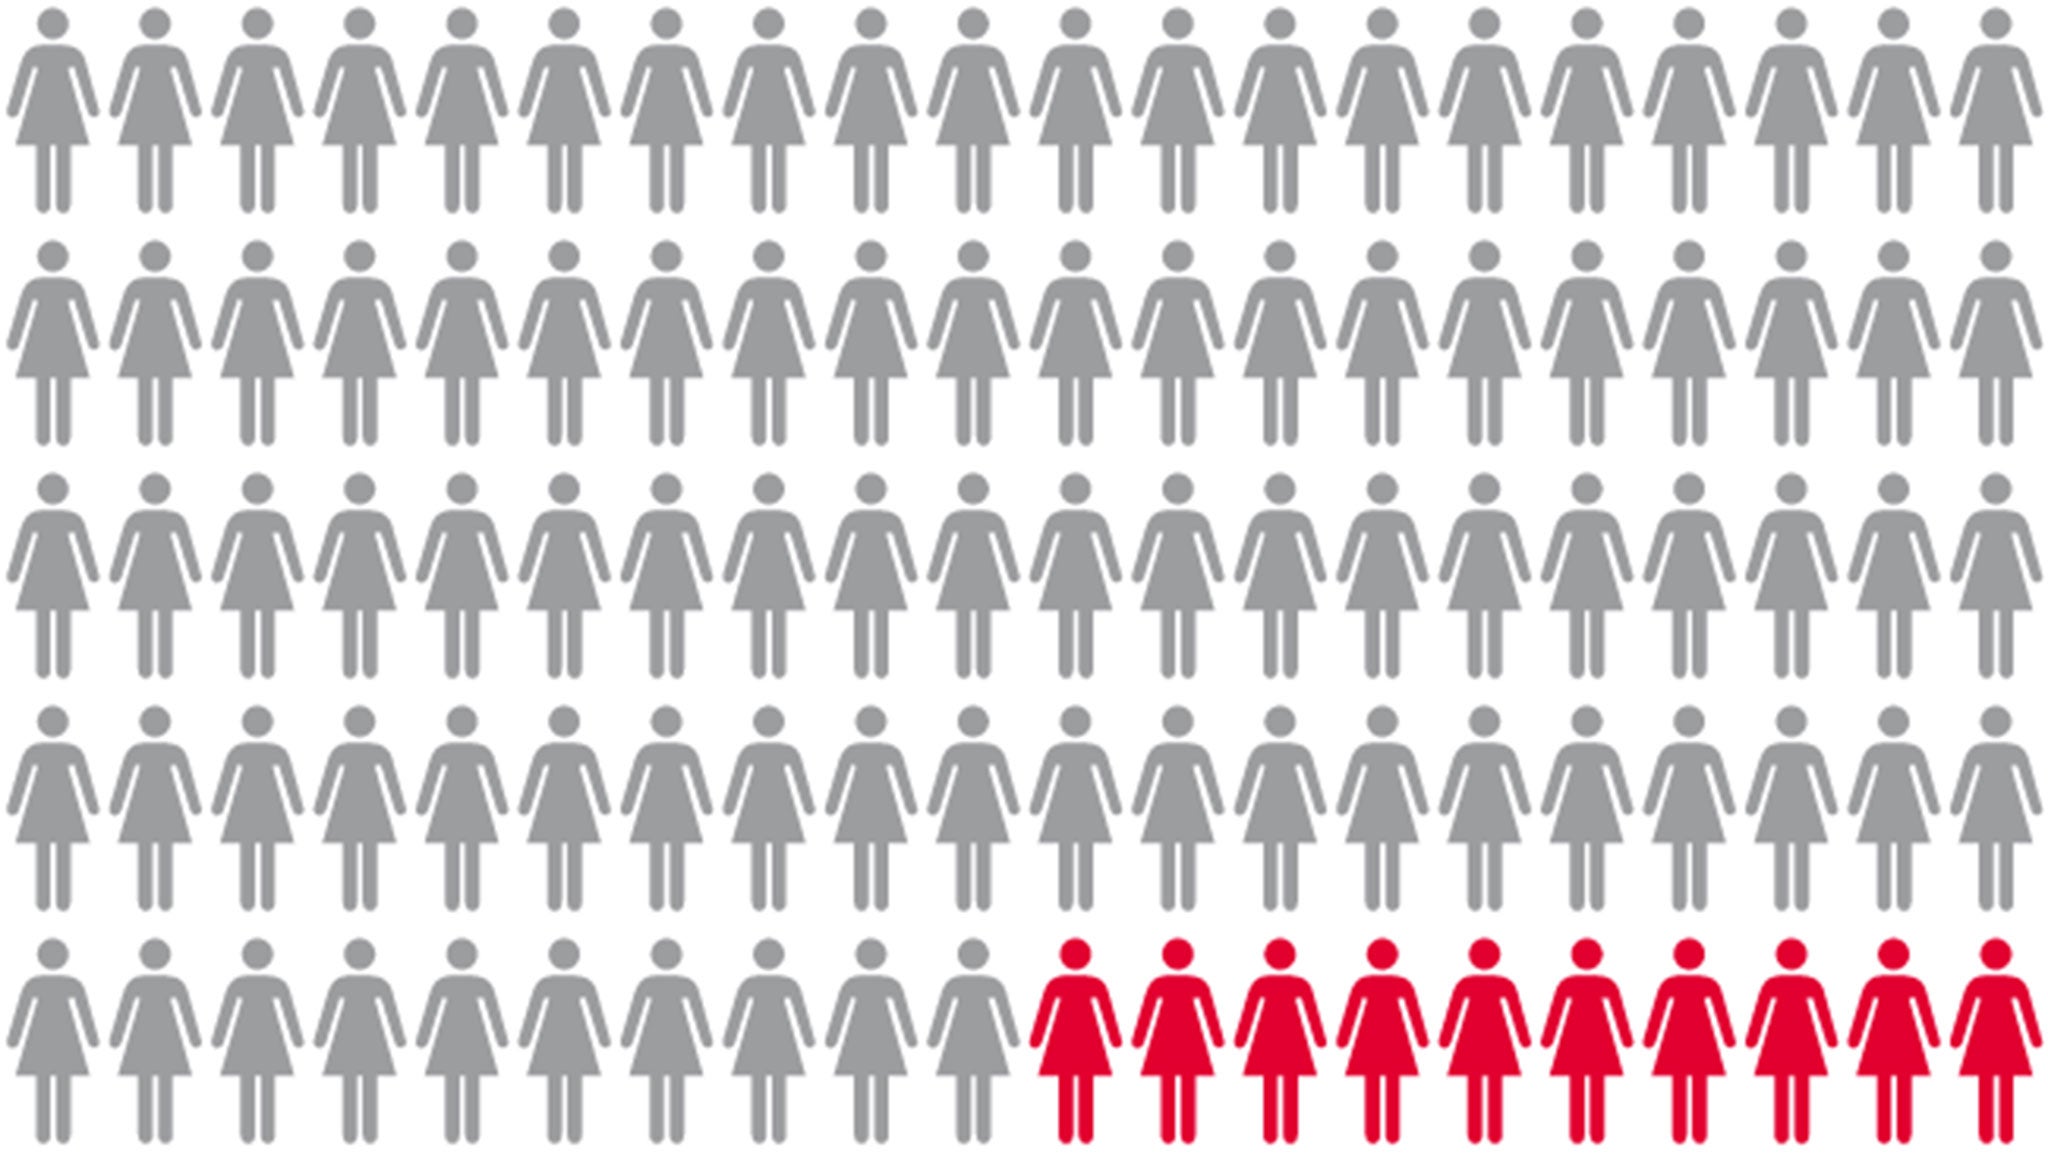 The proportion of women or girls under 20 who are known to have been forced into sexual activity – with the majority going unreported